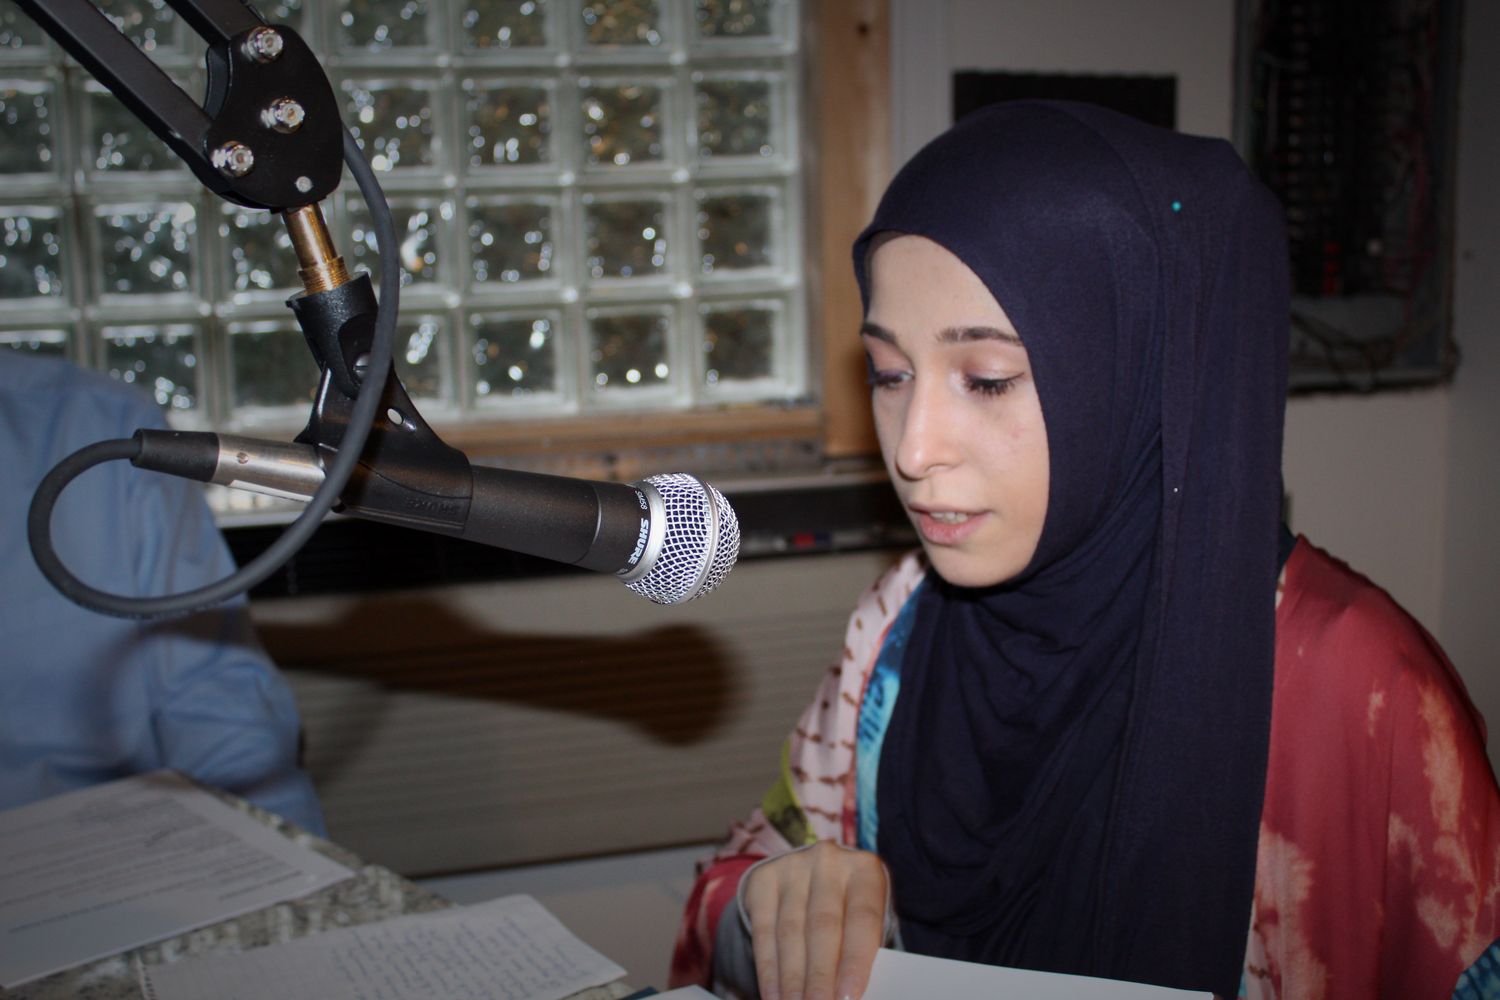 Yasmeen Odeh learns the ropes during a radio workshop led by engineer Jerald White at WMDA 93.5. (Memphis Dawah)